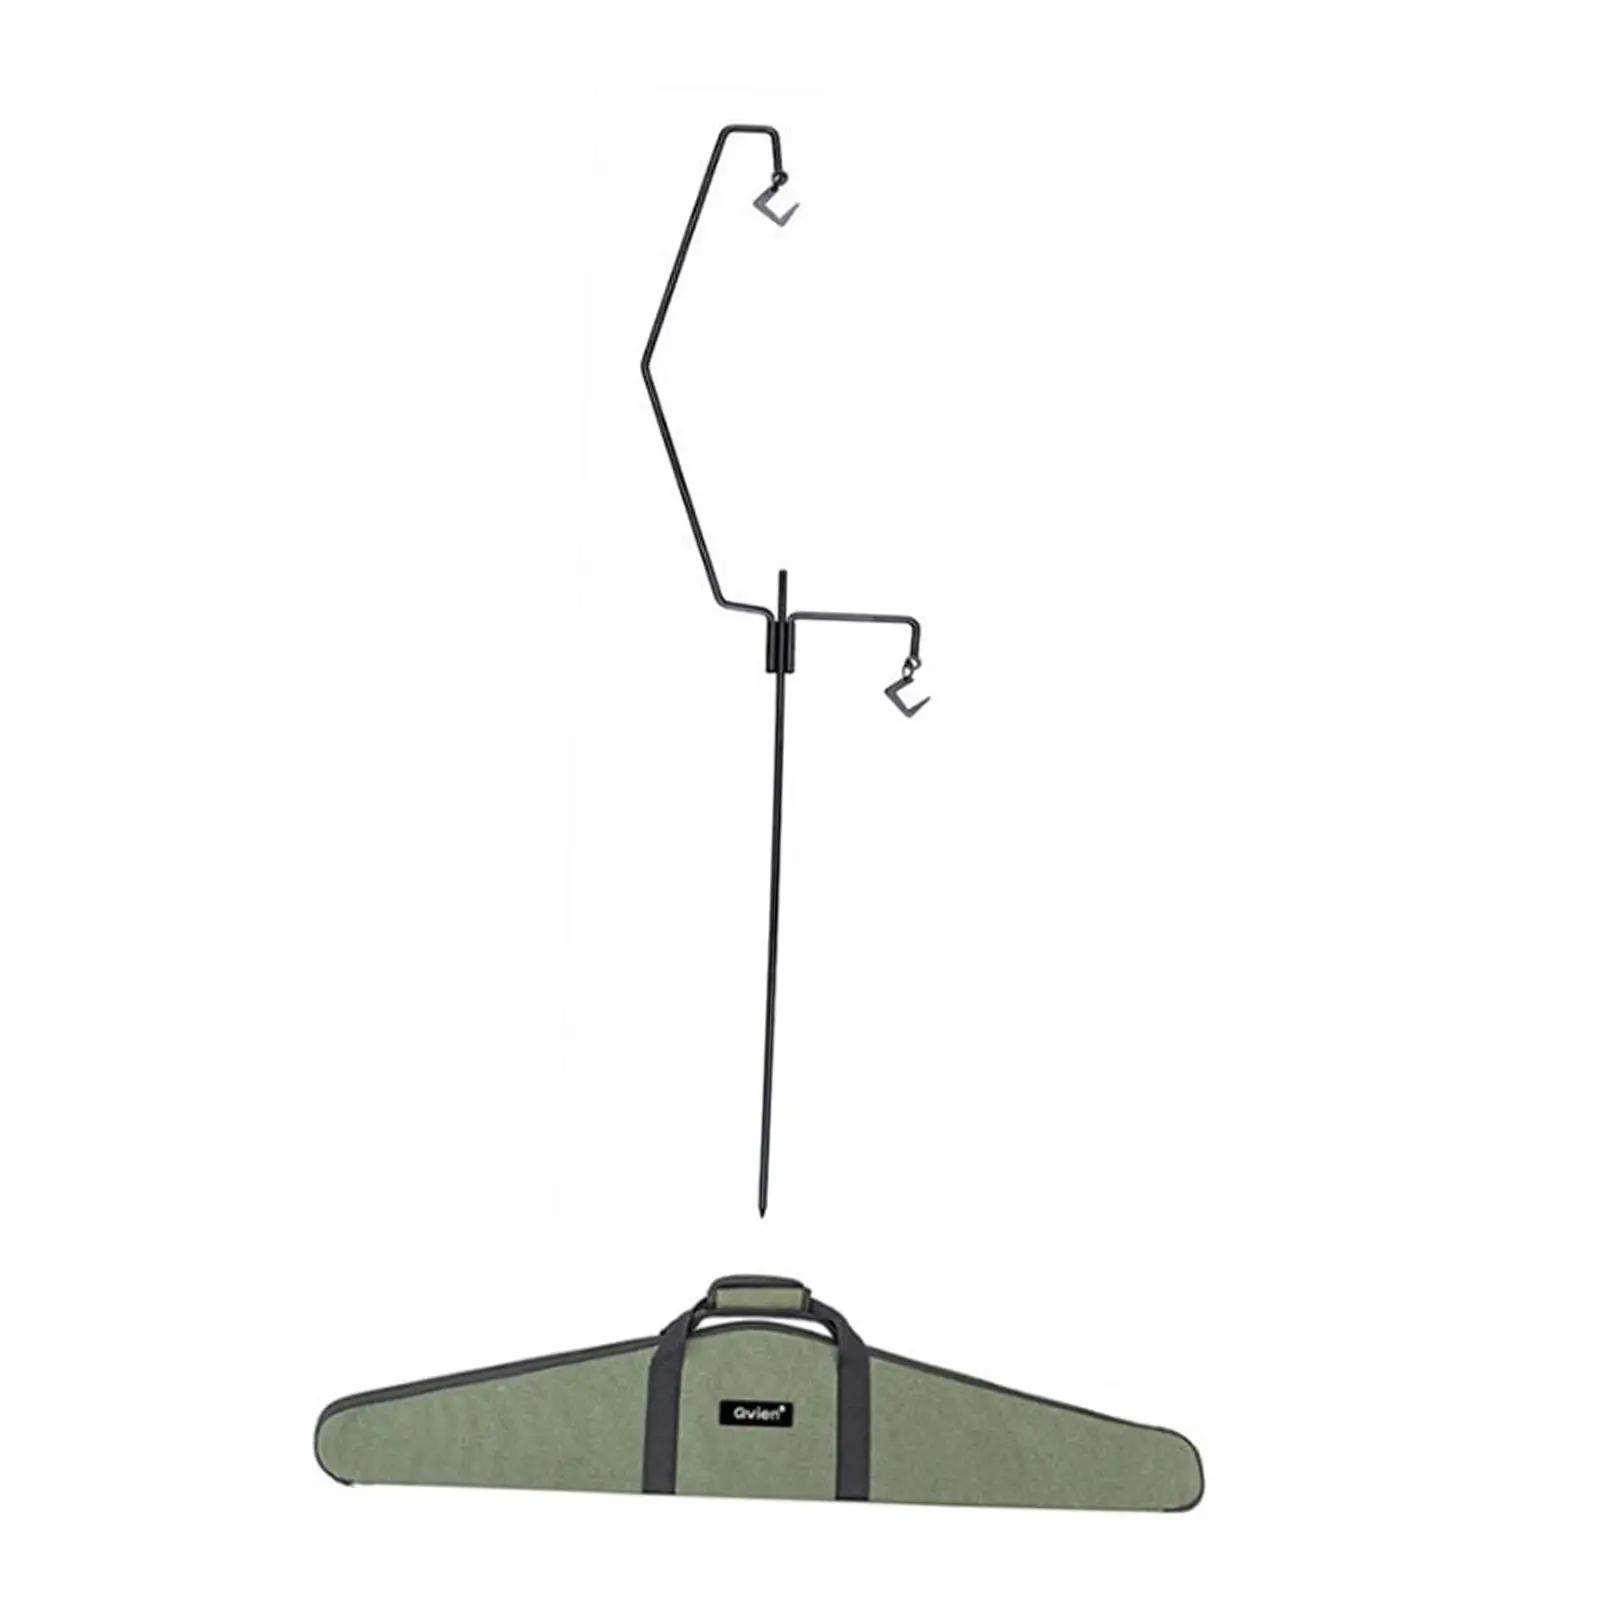 Outdoor lantern stand with ground stake and hook, easy to store, easy to carry,